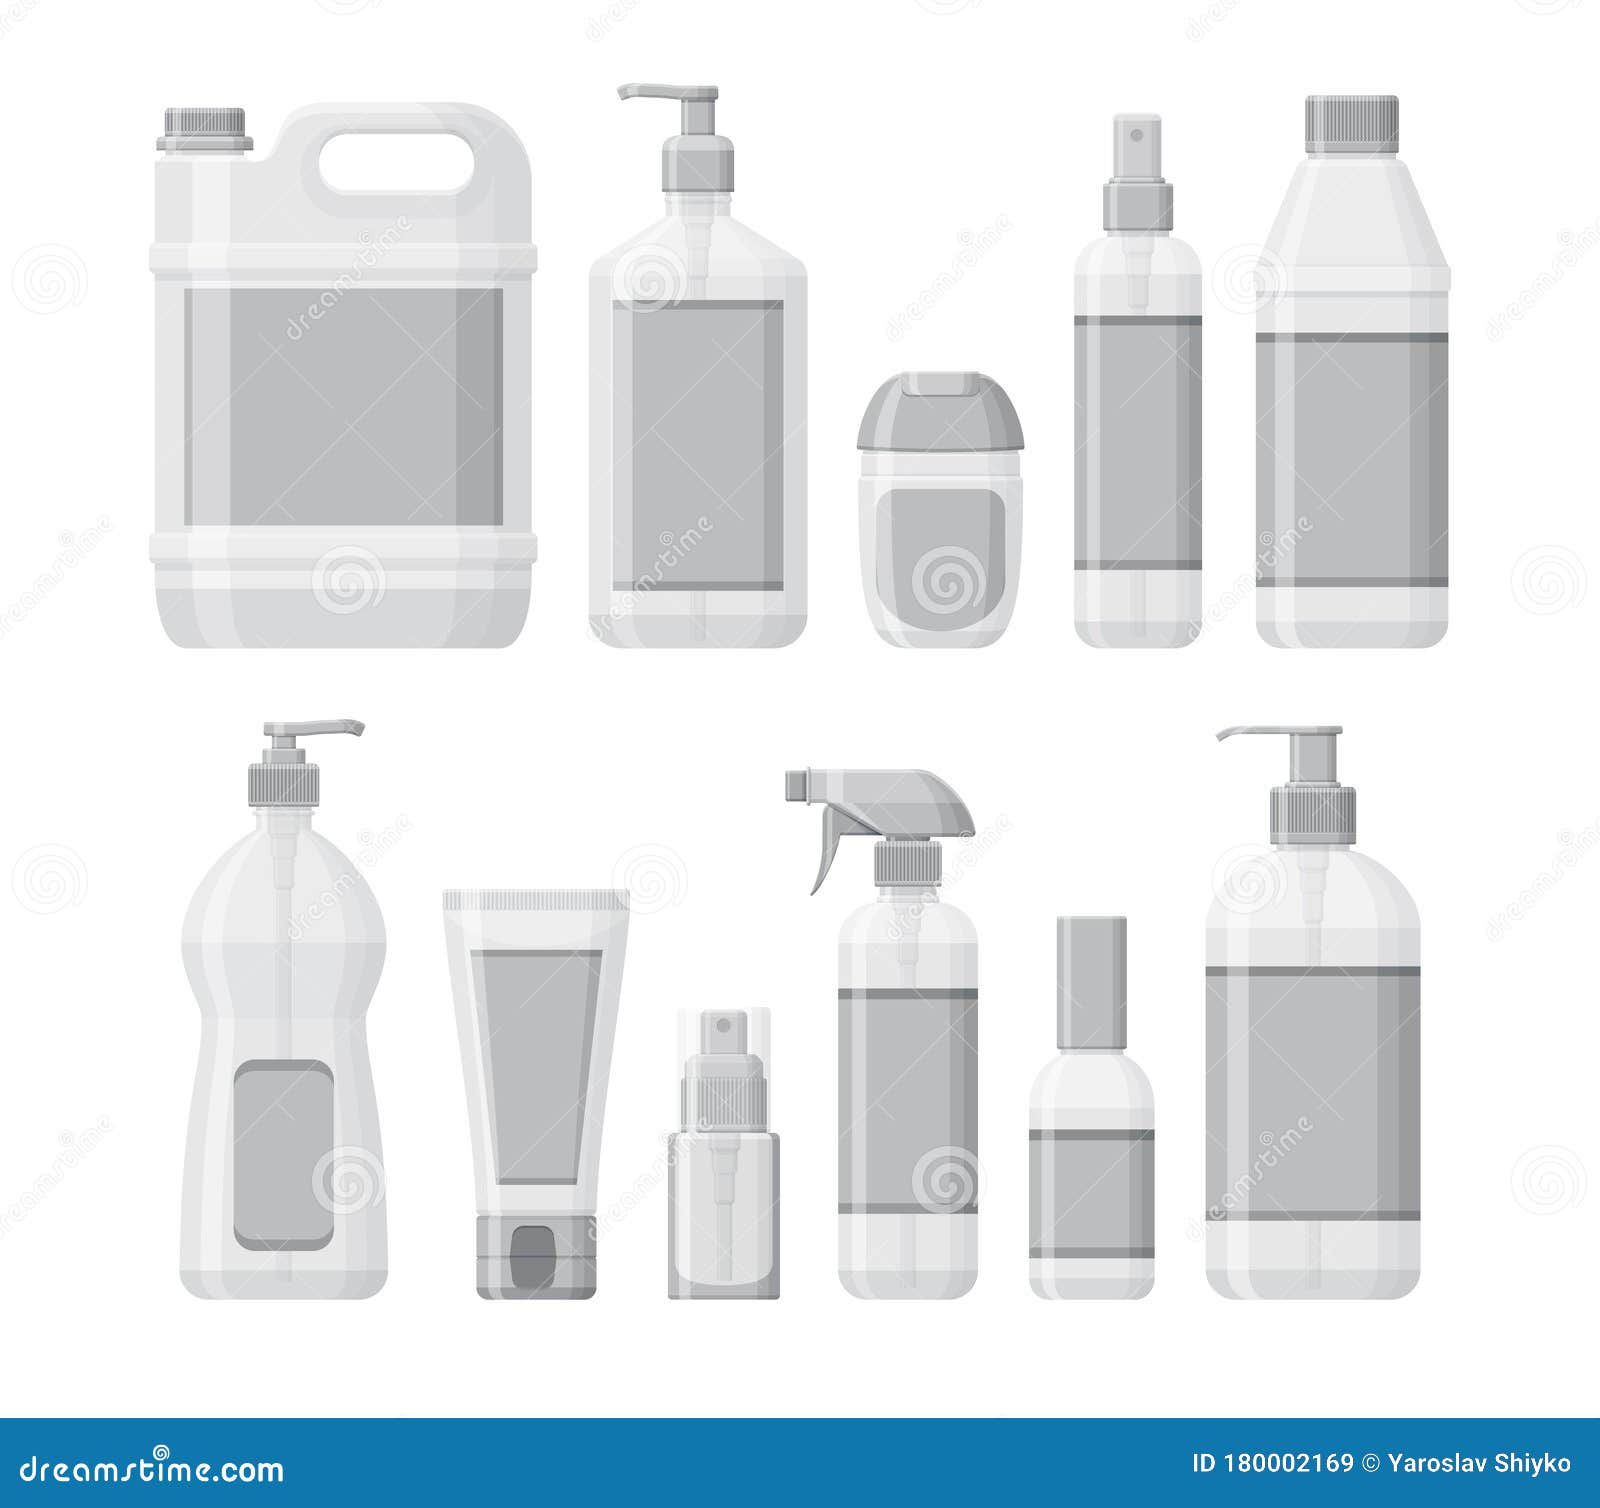 Download Set Of Bottles With Antiseptic And Hand Sanitizer. Washing ...